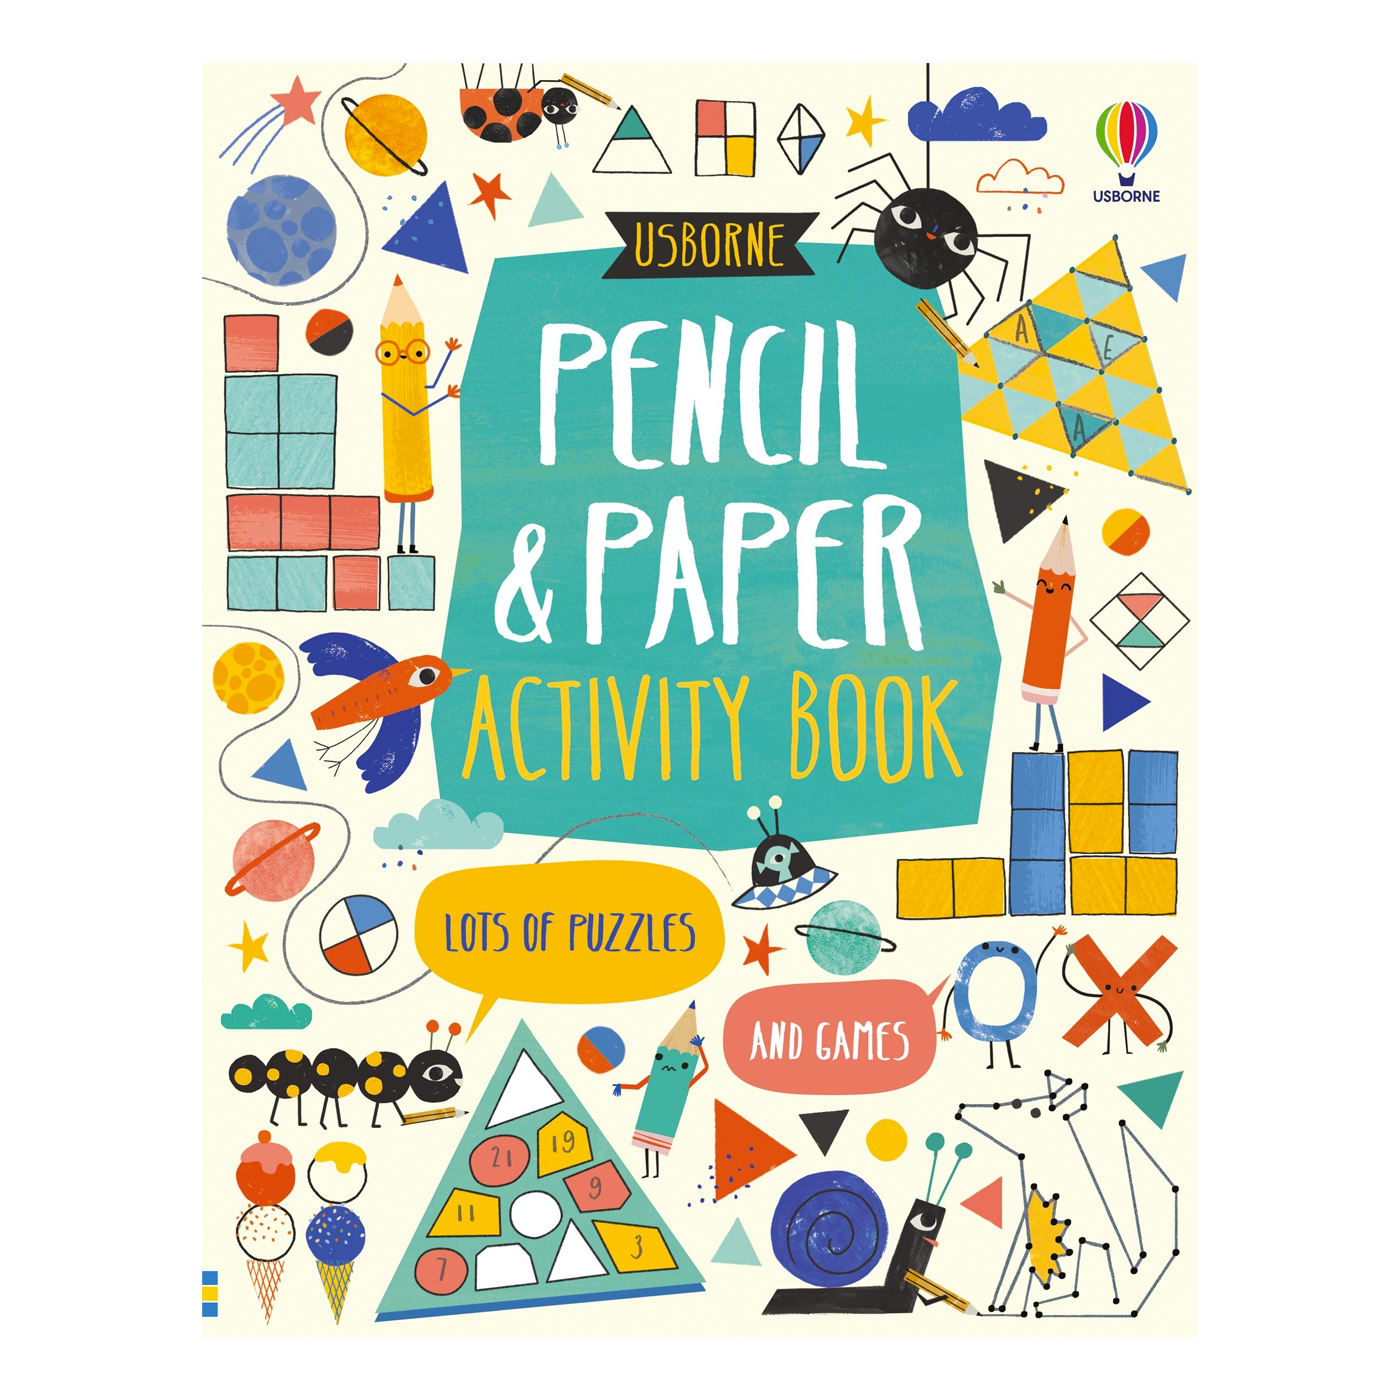  Pencil And Paper Activity Book